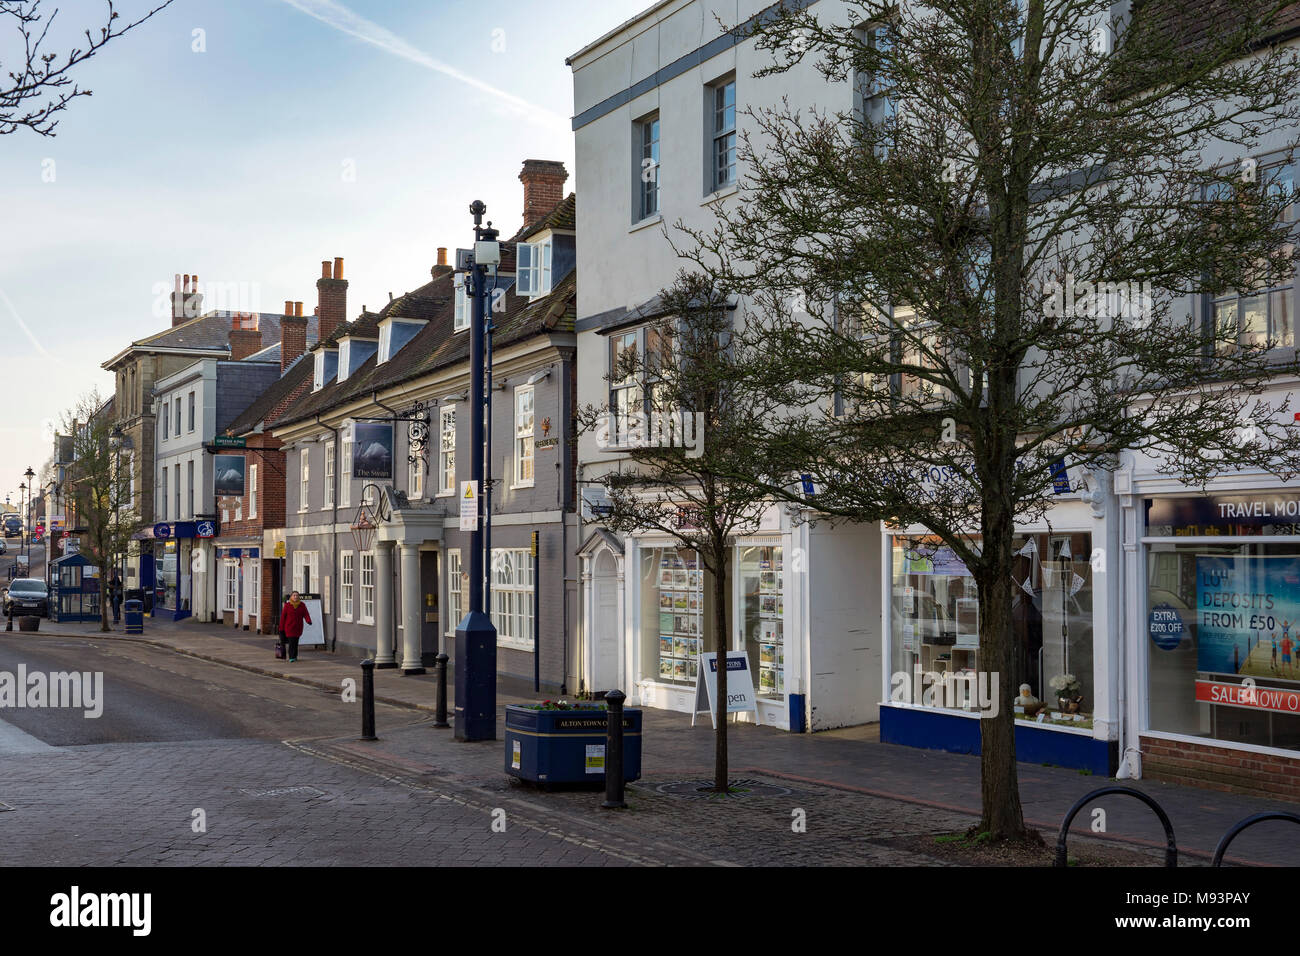 The Market Town of Alton in central Hampshire, southern UK. Stock Photo